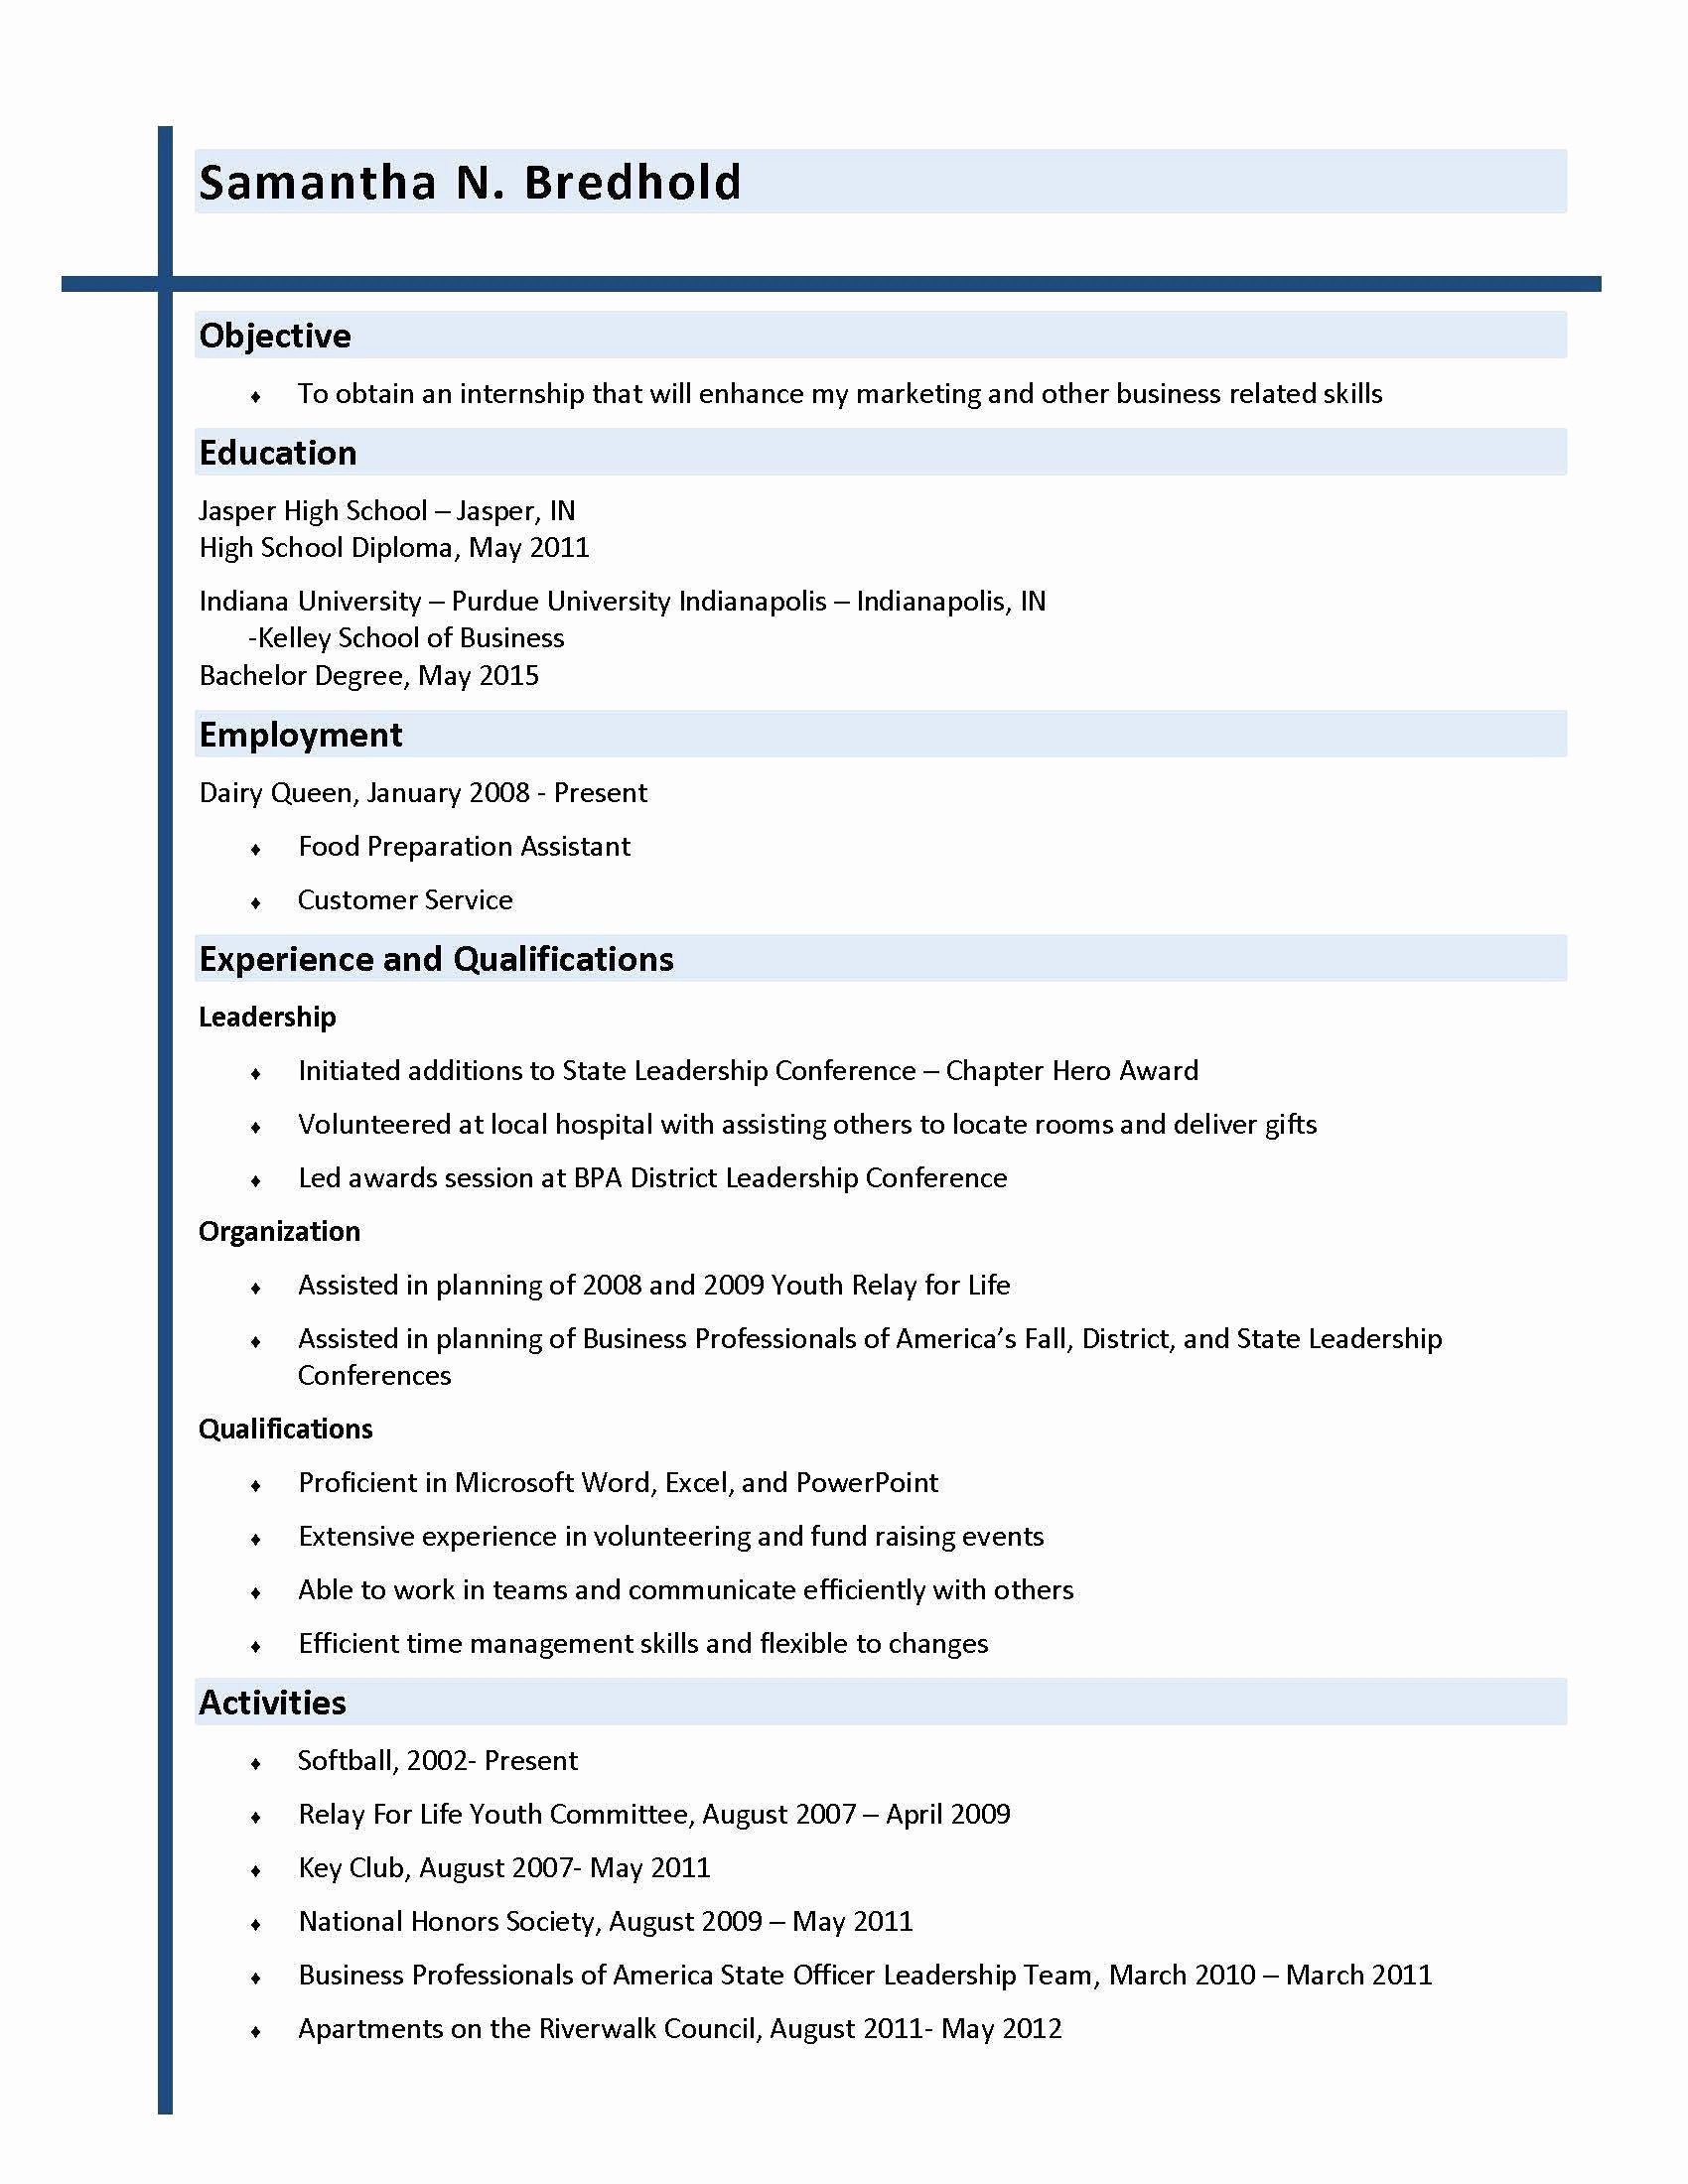 Resume for Internal Promotion Template Unique Resume Objective for Promotion Examples Cover Letter